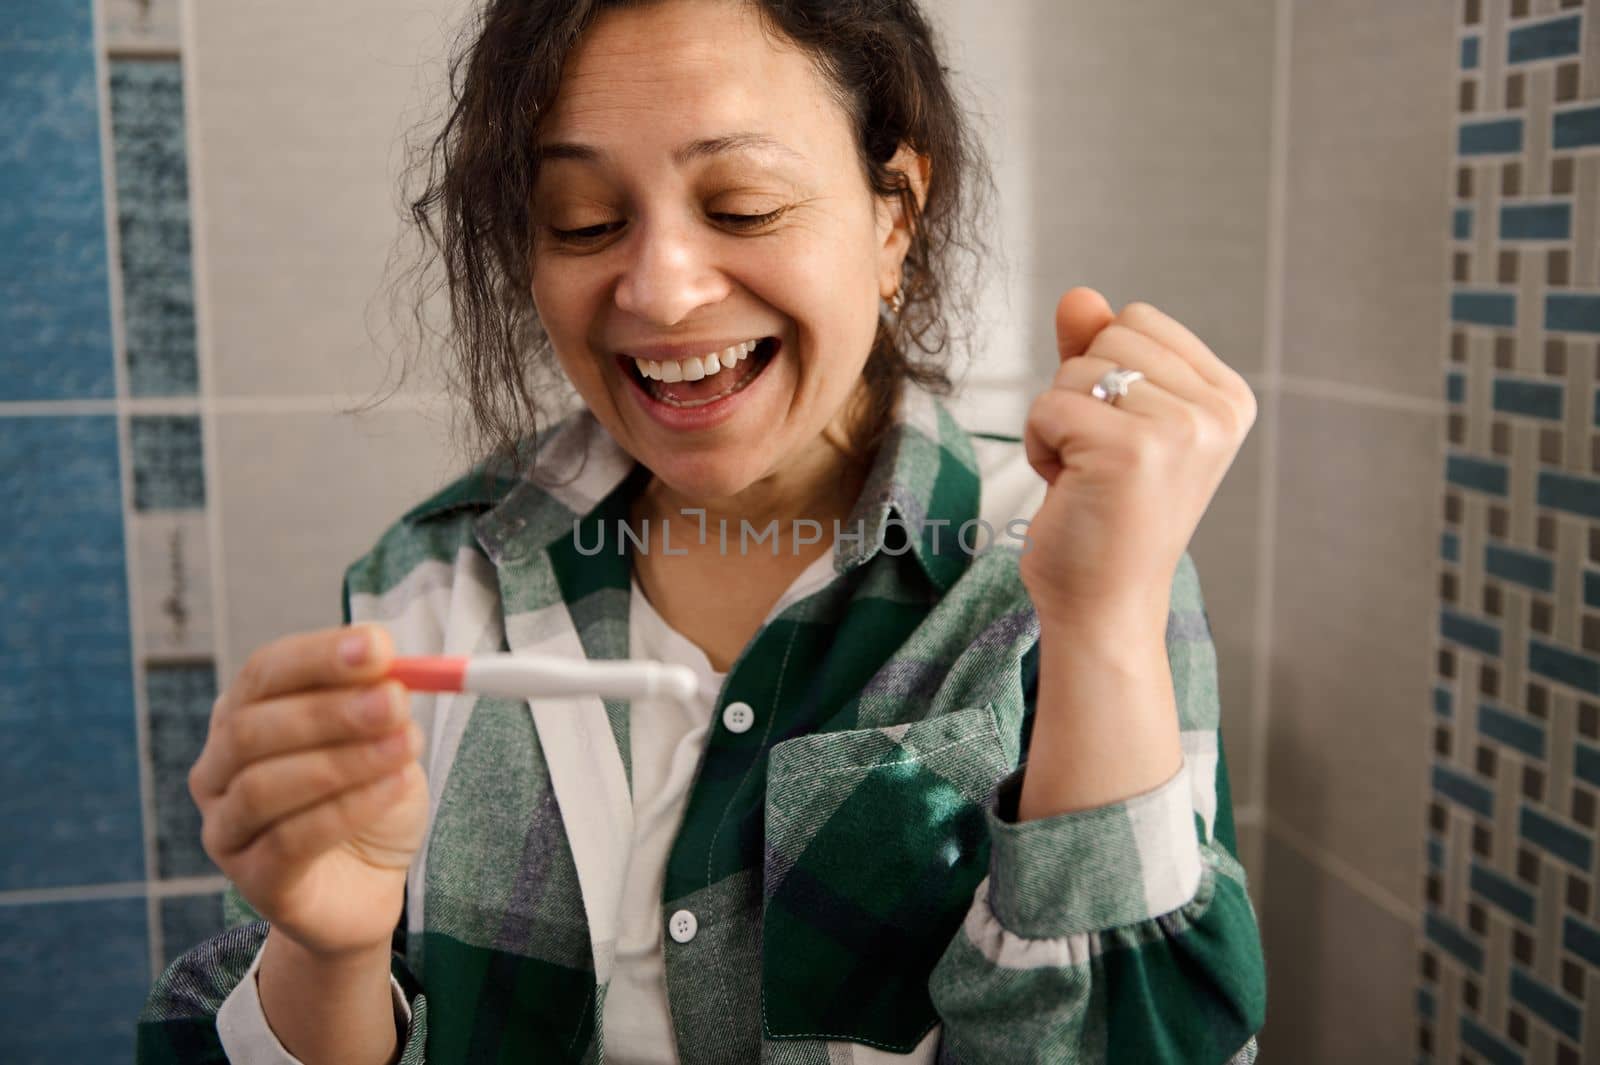 Charming middle-aged woman rejoicing at at positive pregnancy test by artgf